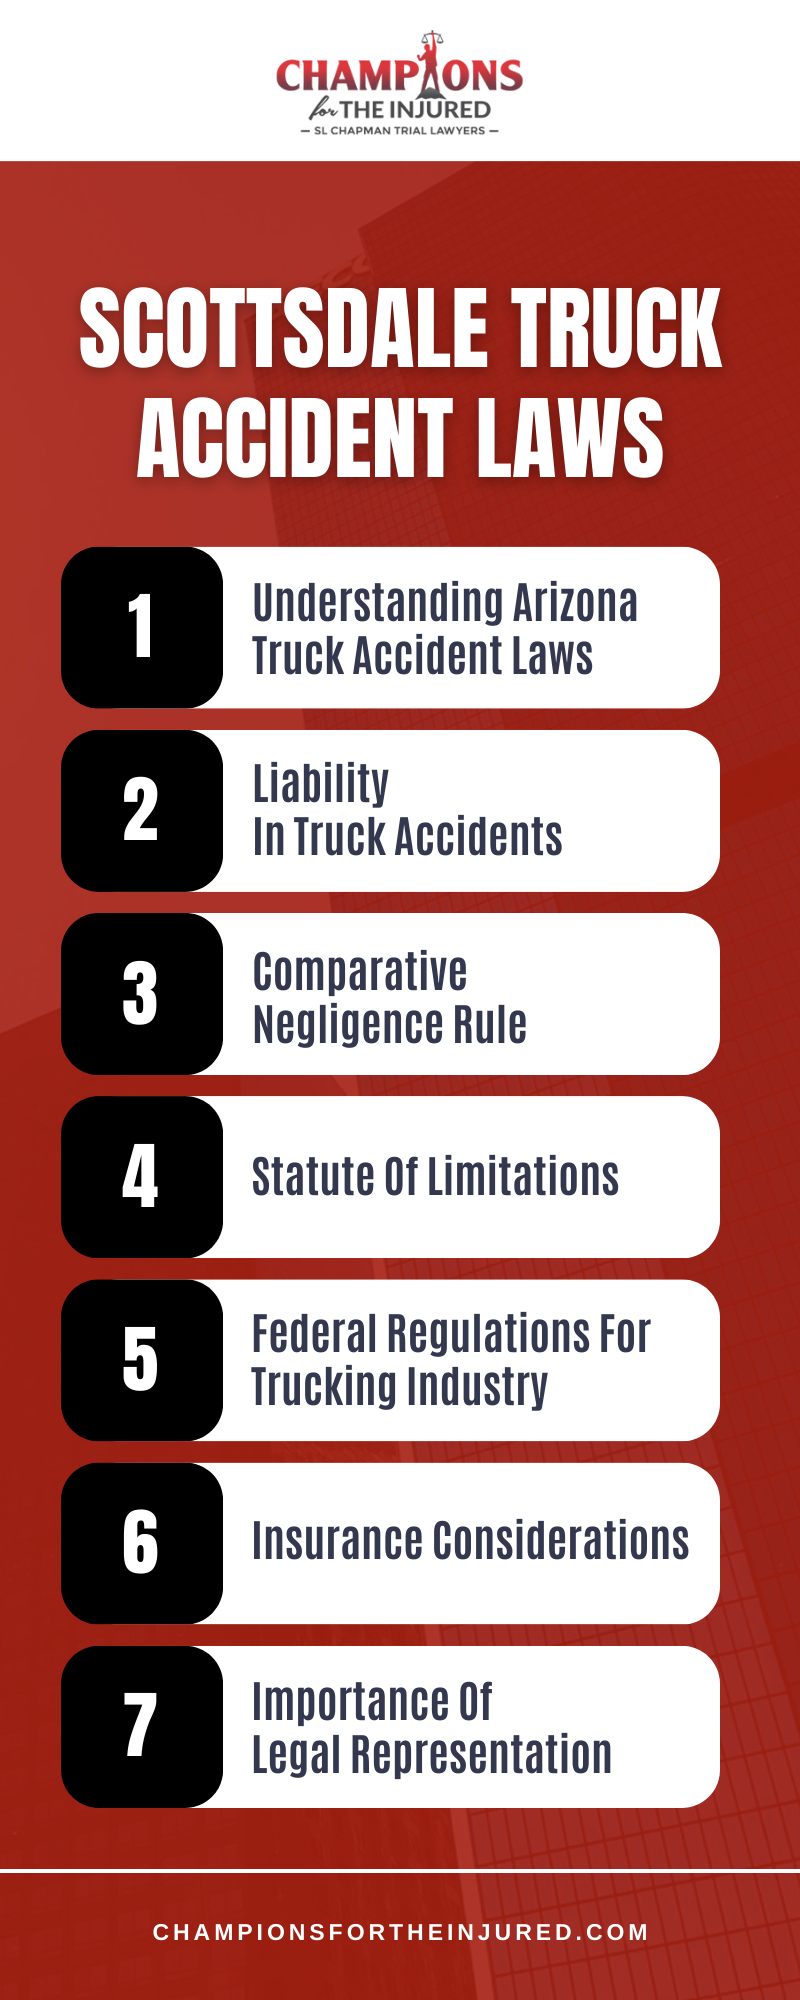 Scottsdale Truck Accident Laws Infographic